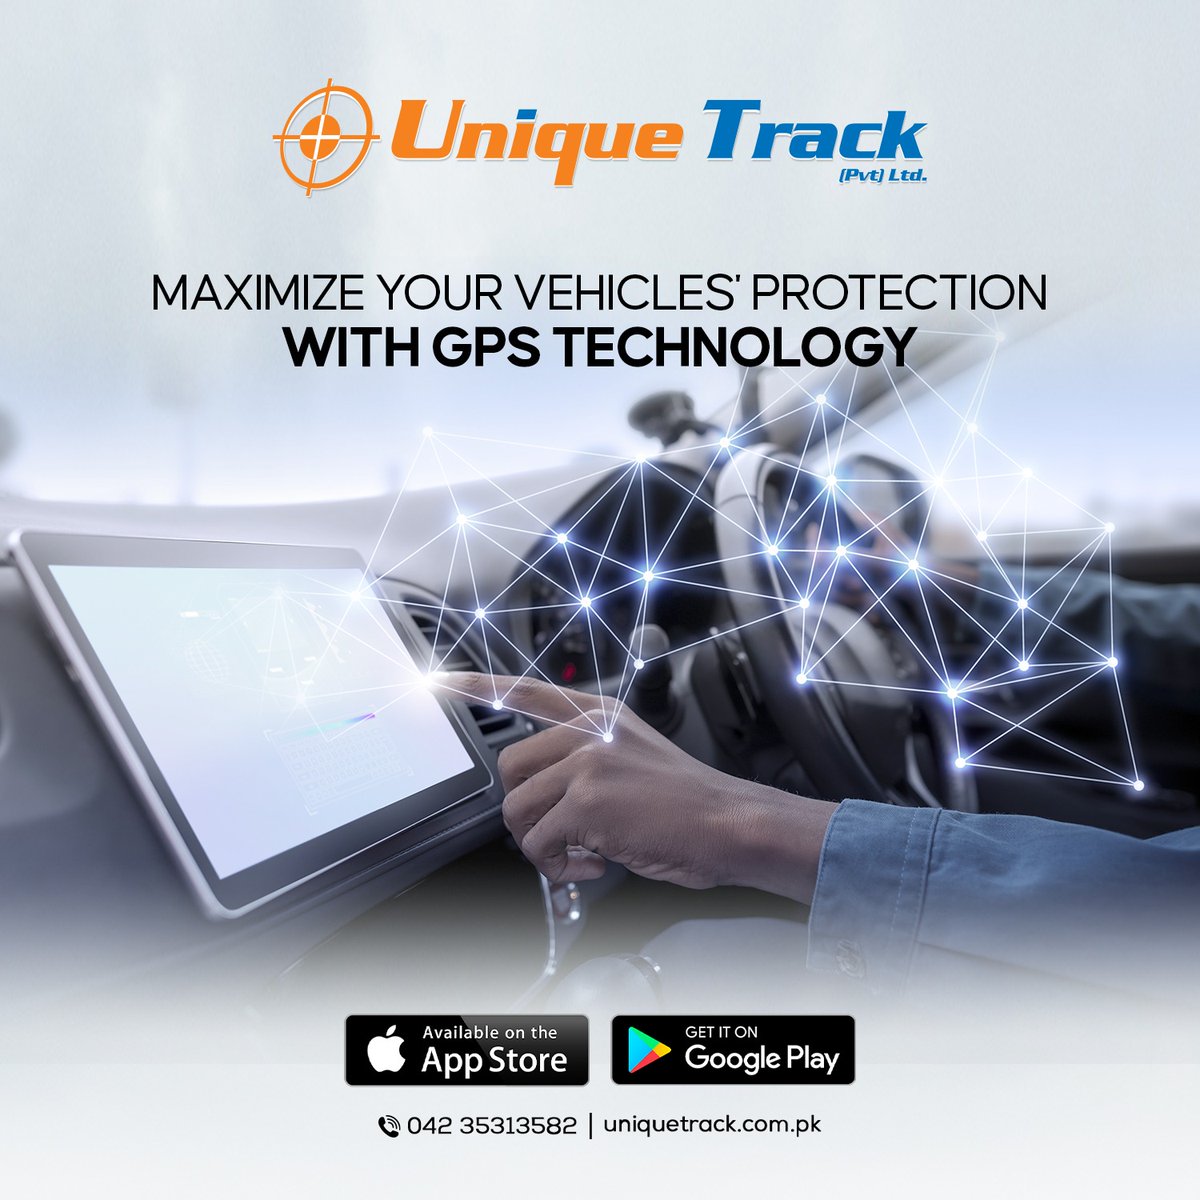 Unique Track Live Tracker, your ultimate solution for car security and peace of mind.
📱 : 03234444434
#UniqueTrack #VehicleProtection #LiveTracker #CarTracker #BestCarGPSTracker #BestCarGPSTrackingDevice #BestCarTracker #BestCarTrackerCompaniesInPakistan #BestCarTrackerCompany